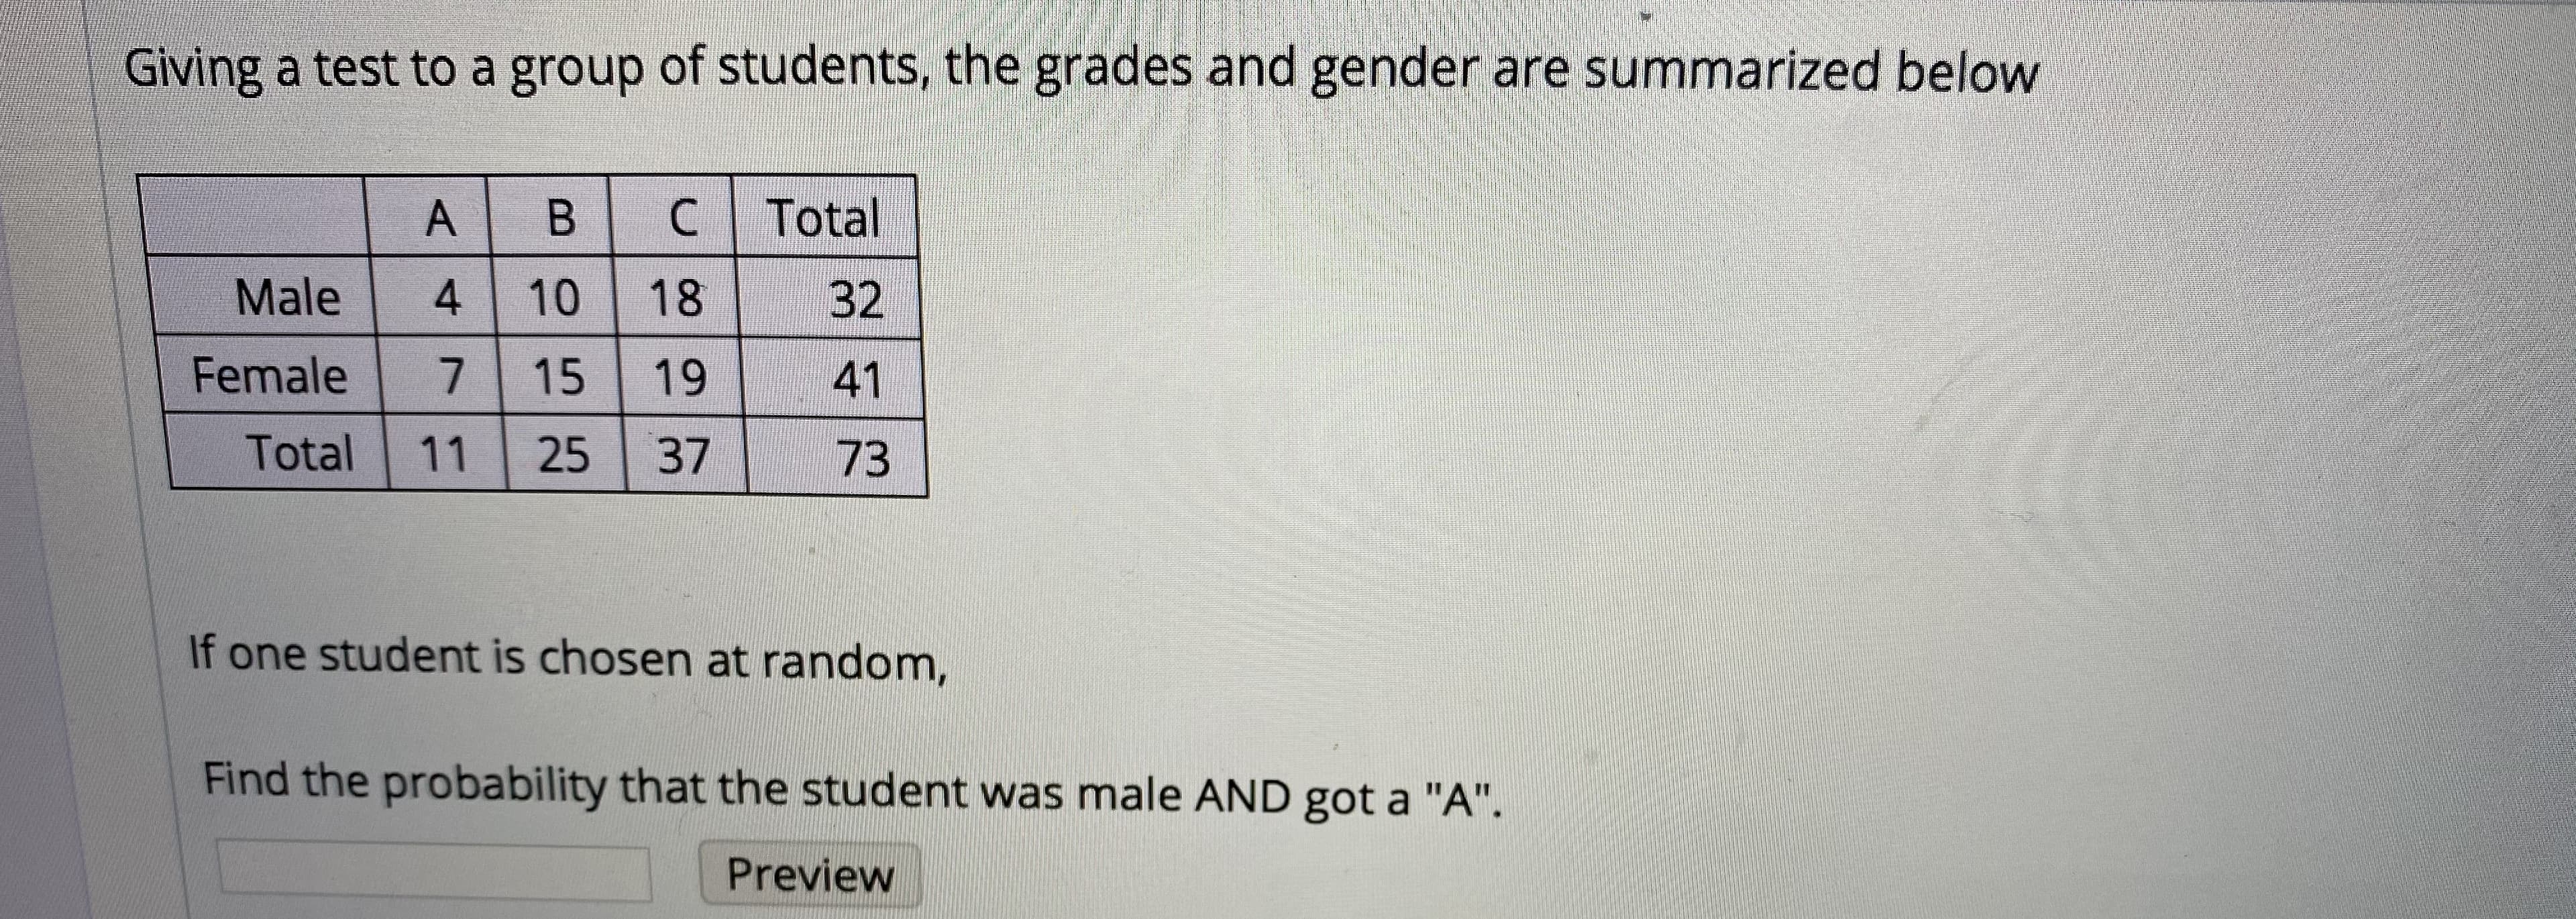 Giving a test to a group of students, the grades and gender are summarized below
Total
Male
4
10
18
32
Female
15
19
41
Total
11
25
37
73
If one student is chosen at random,
Find the probability that the student was male AND got a "A".
Preview
